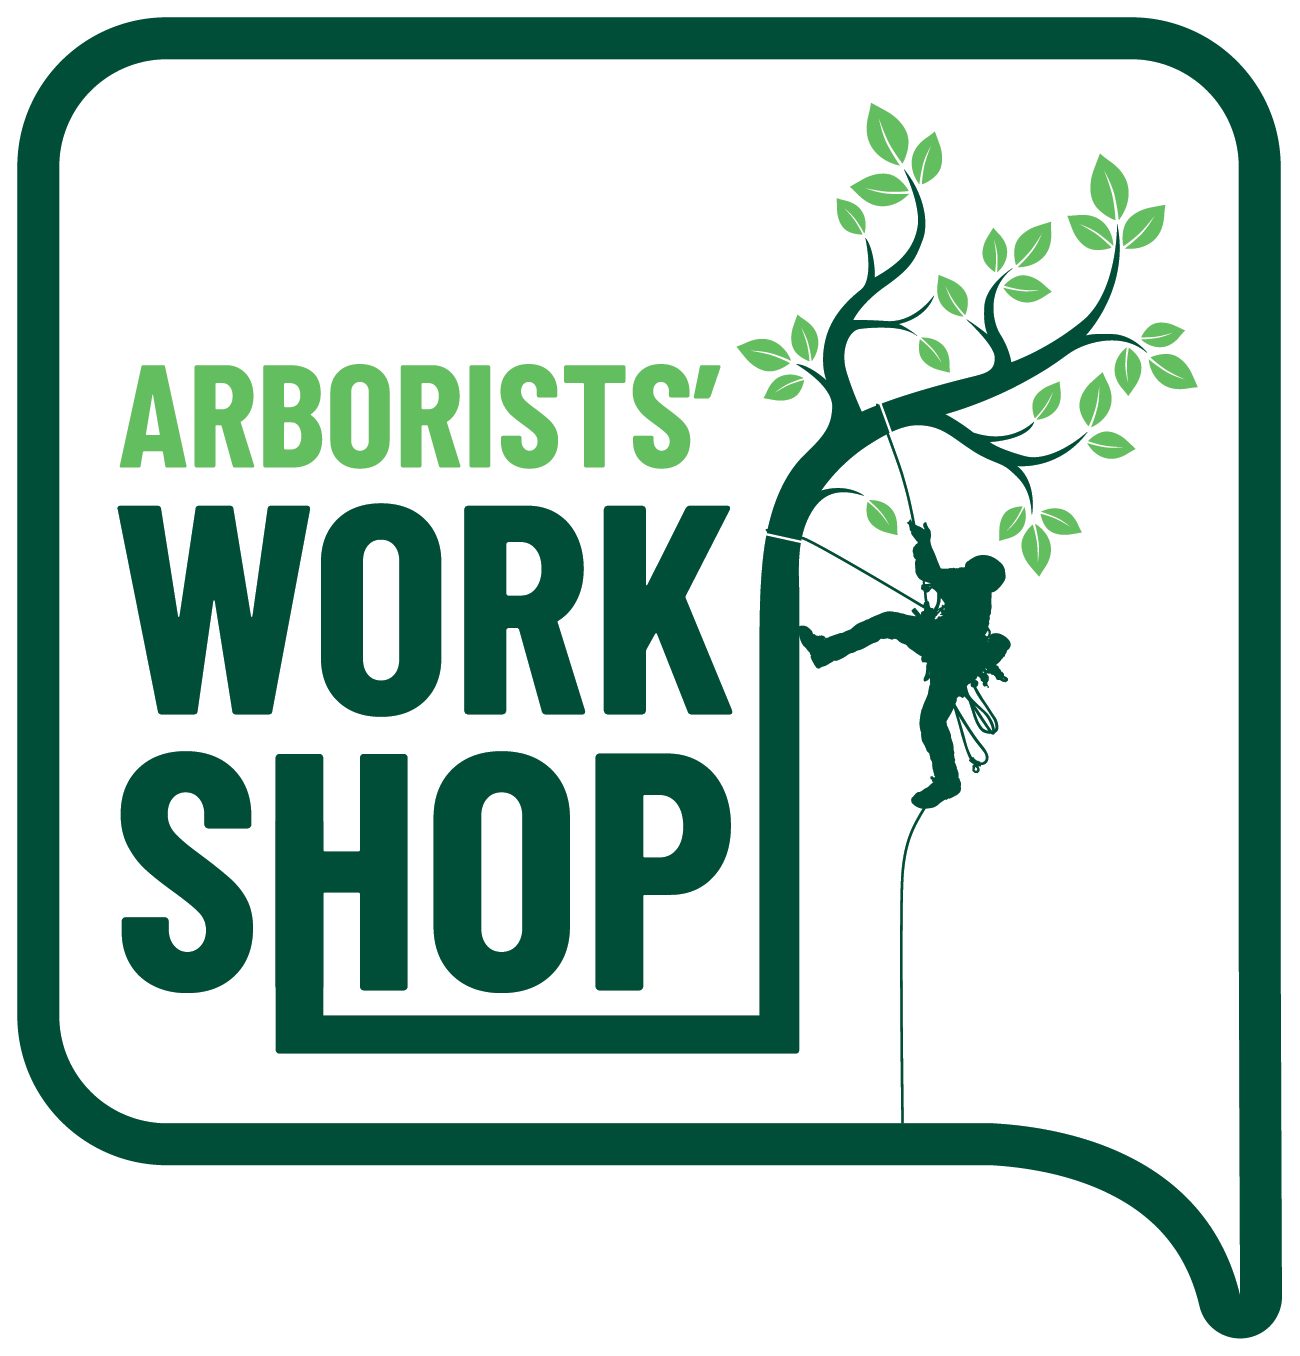 Arborists’ Workshop Sessions at the ARB Show